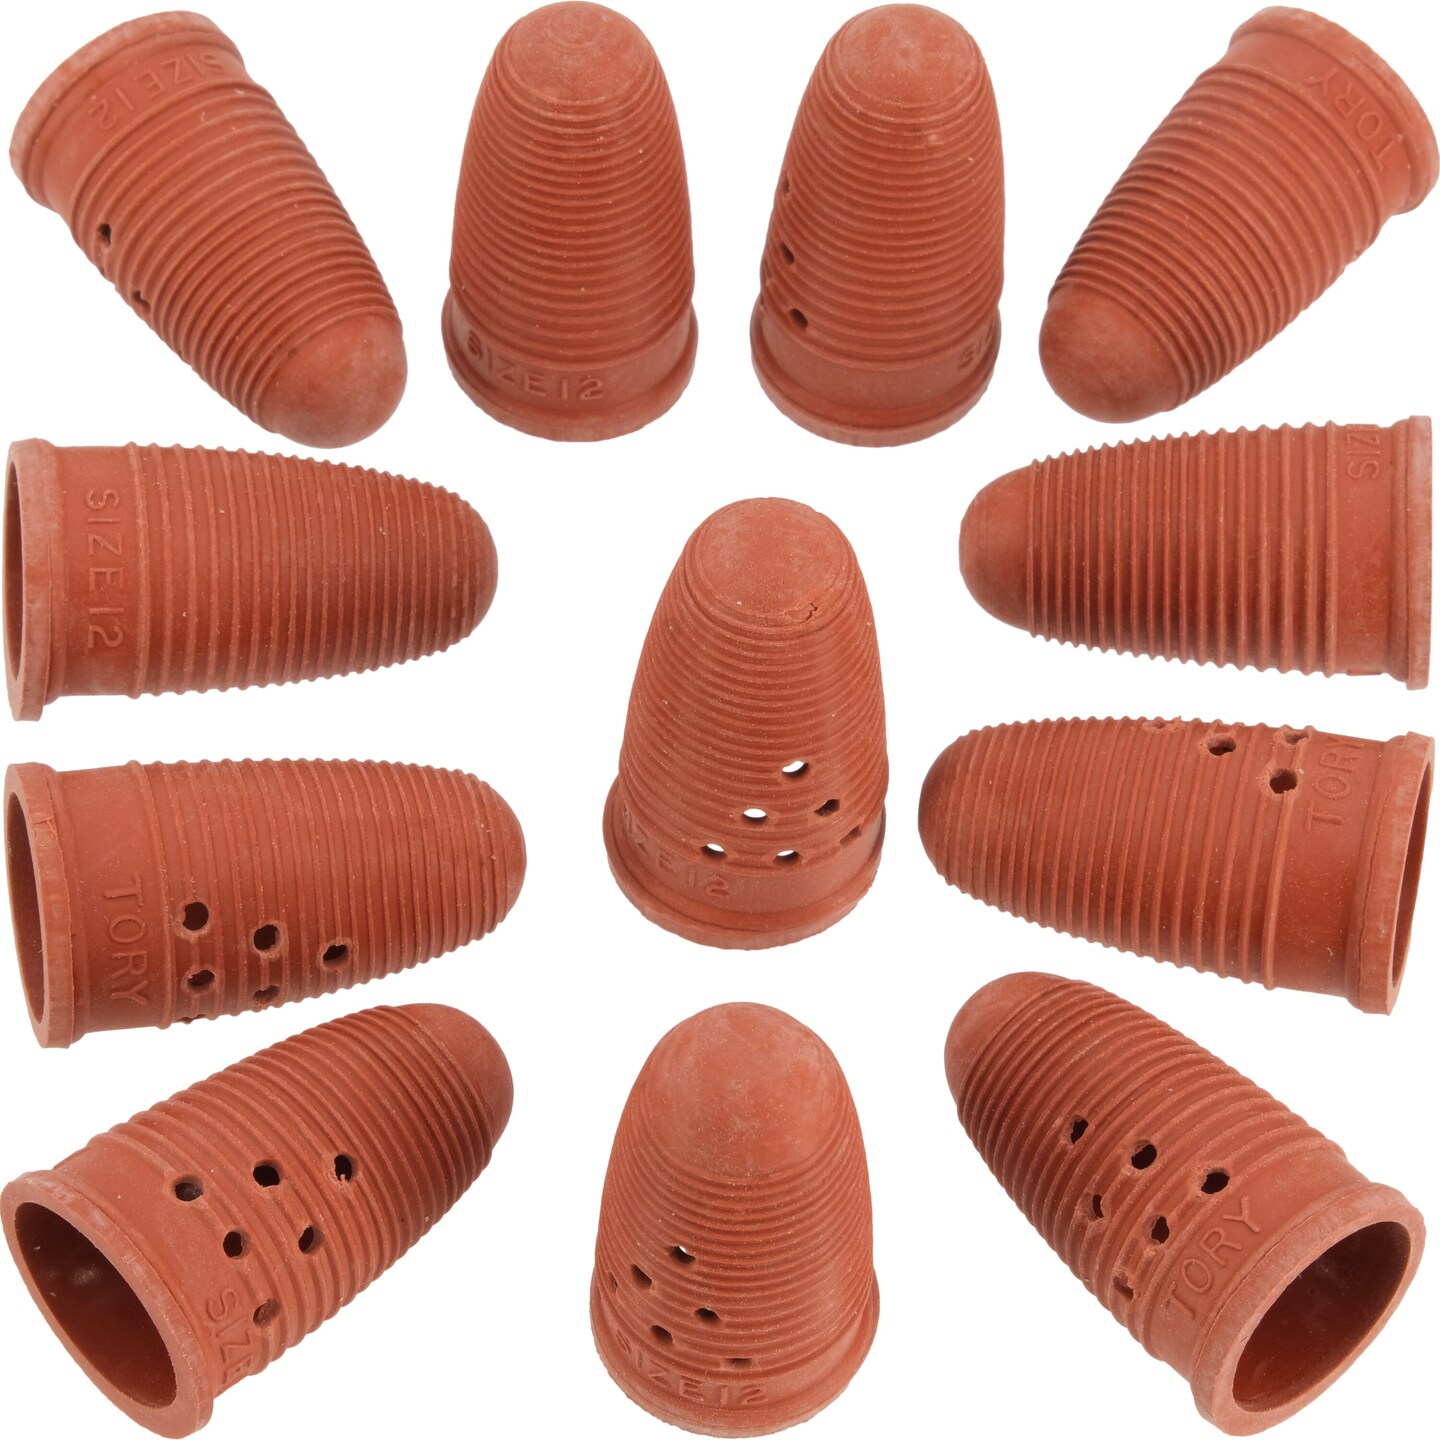 Natural Rubber Fingertip Cots Pads Finger Guards Protection Pack of 12